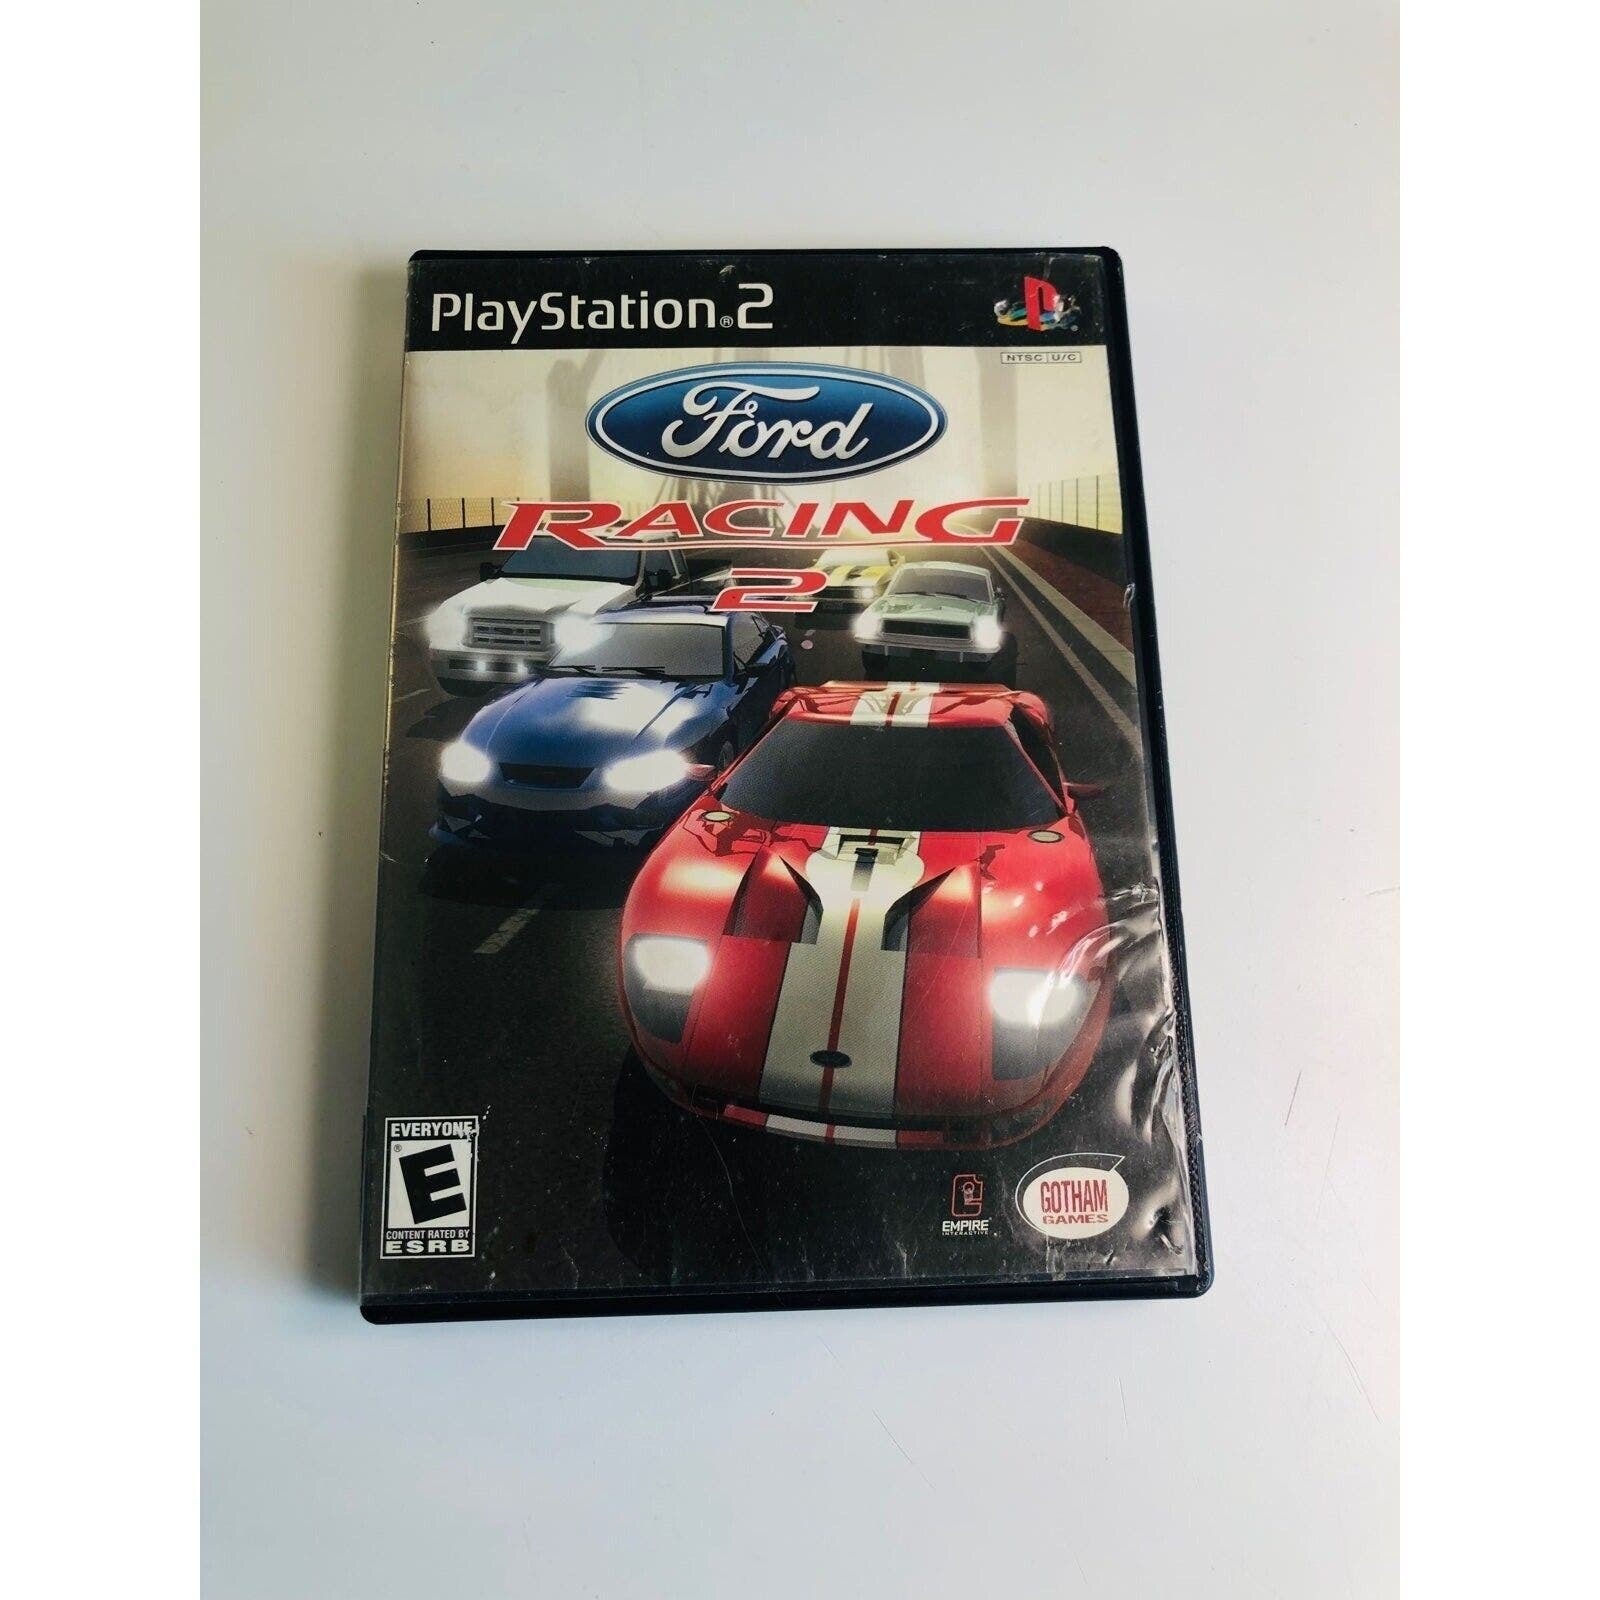 Ford Racing 2 For Playstation 2 Classic - $7.70